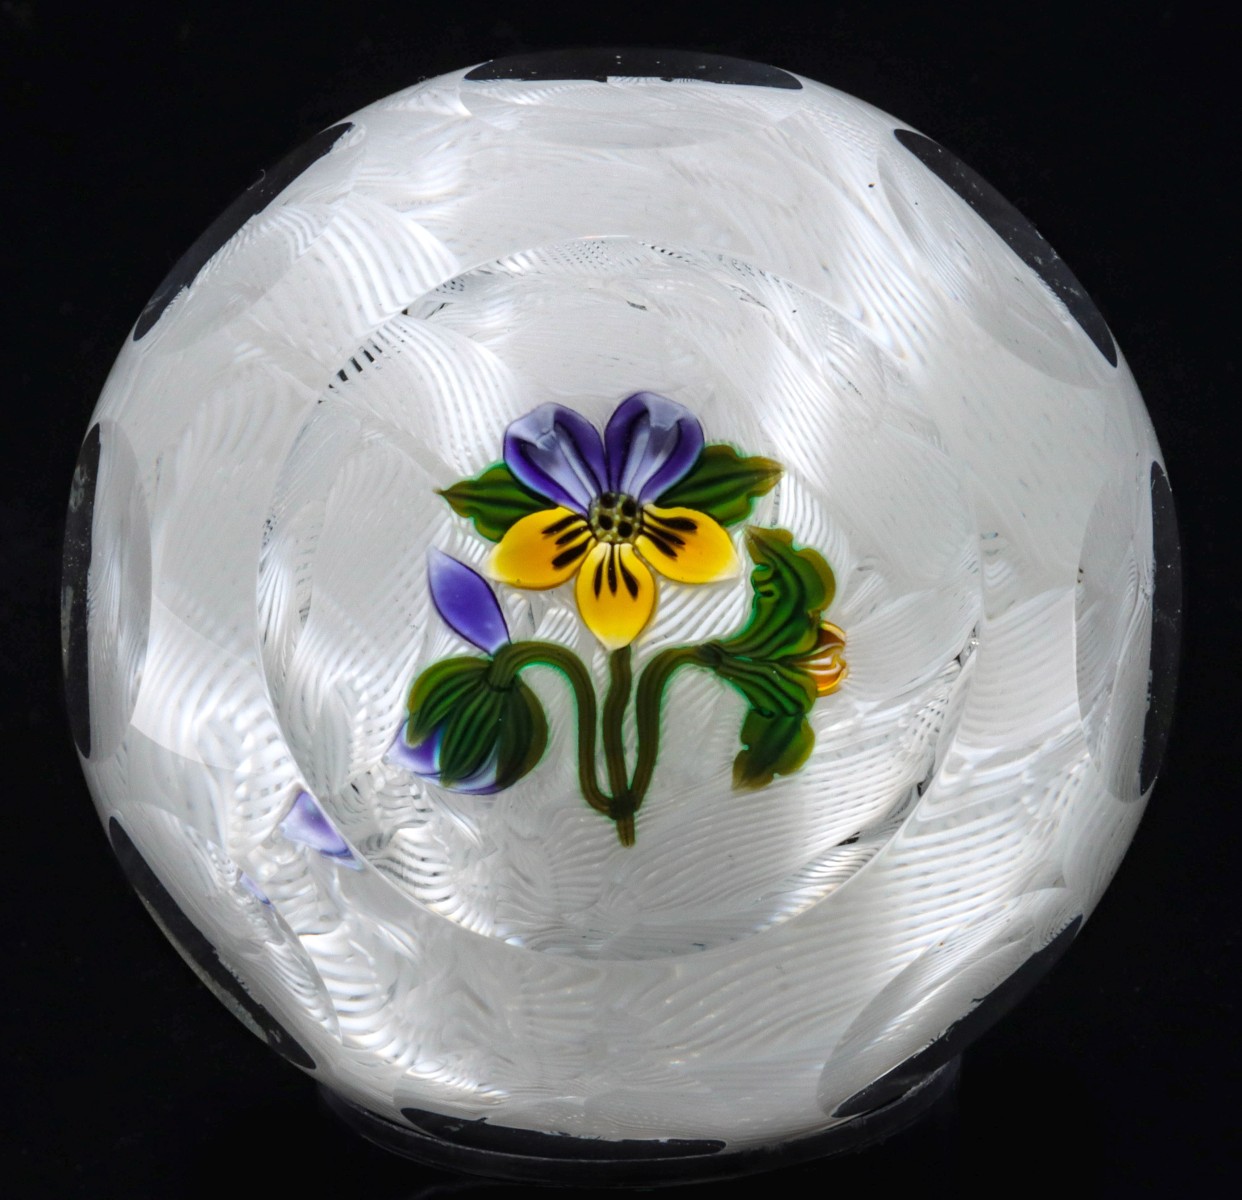 A 1994 PERTHSHIRE PAPERWEIGHT WITH PANSY ON MUSLIN